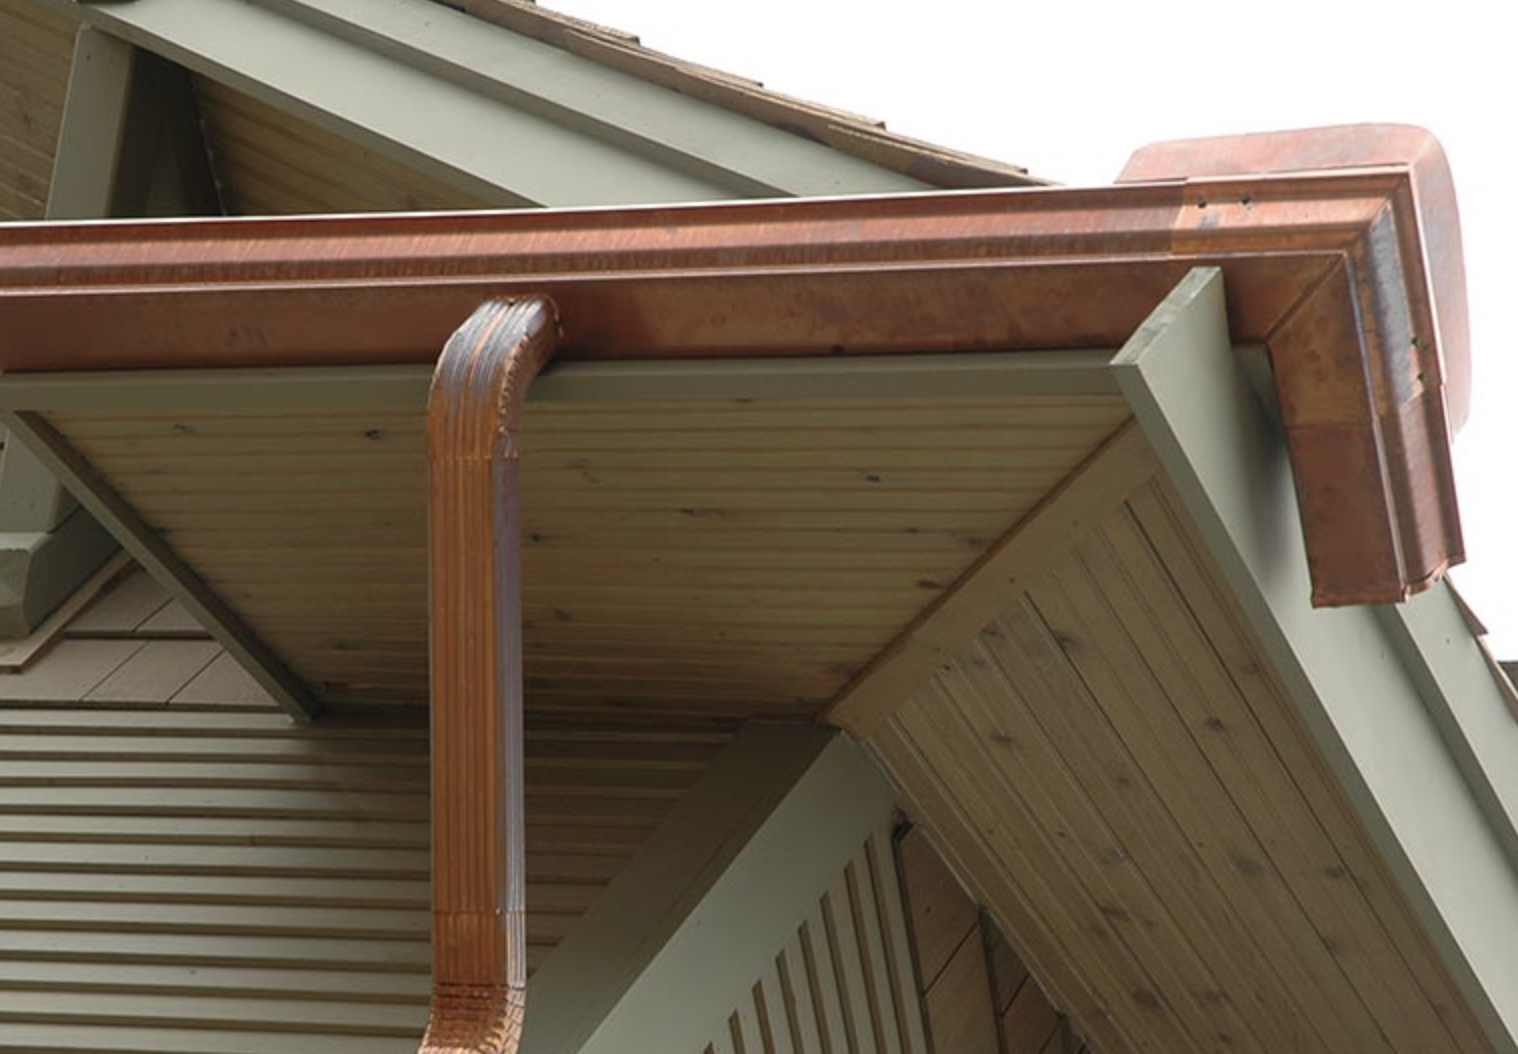 copper gutter and downspout on the corner of a home's roof.